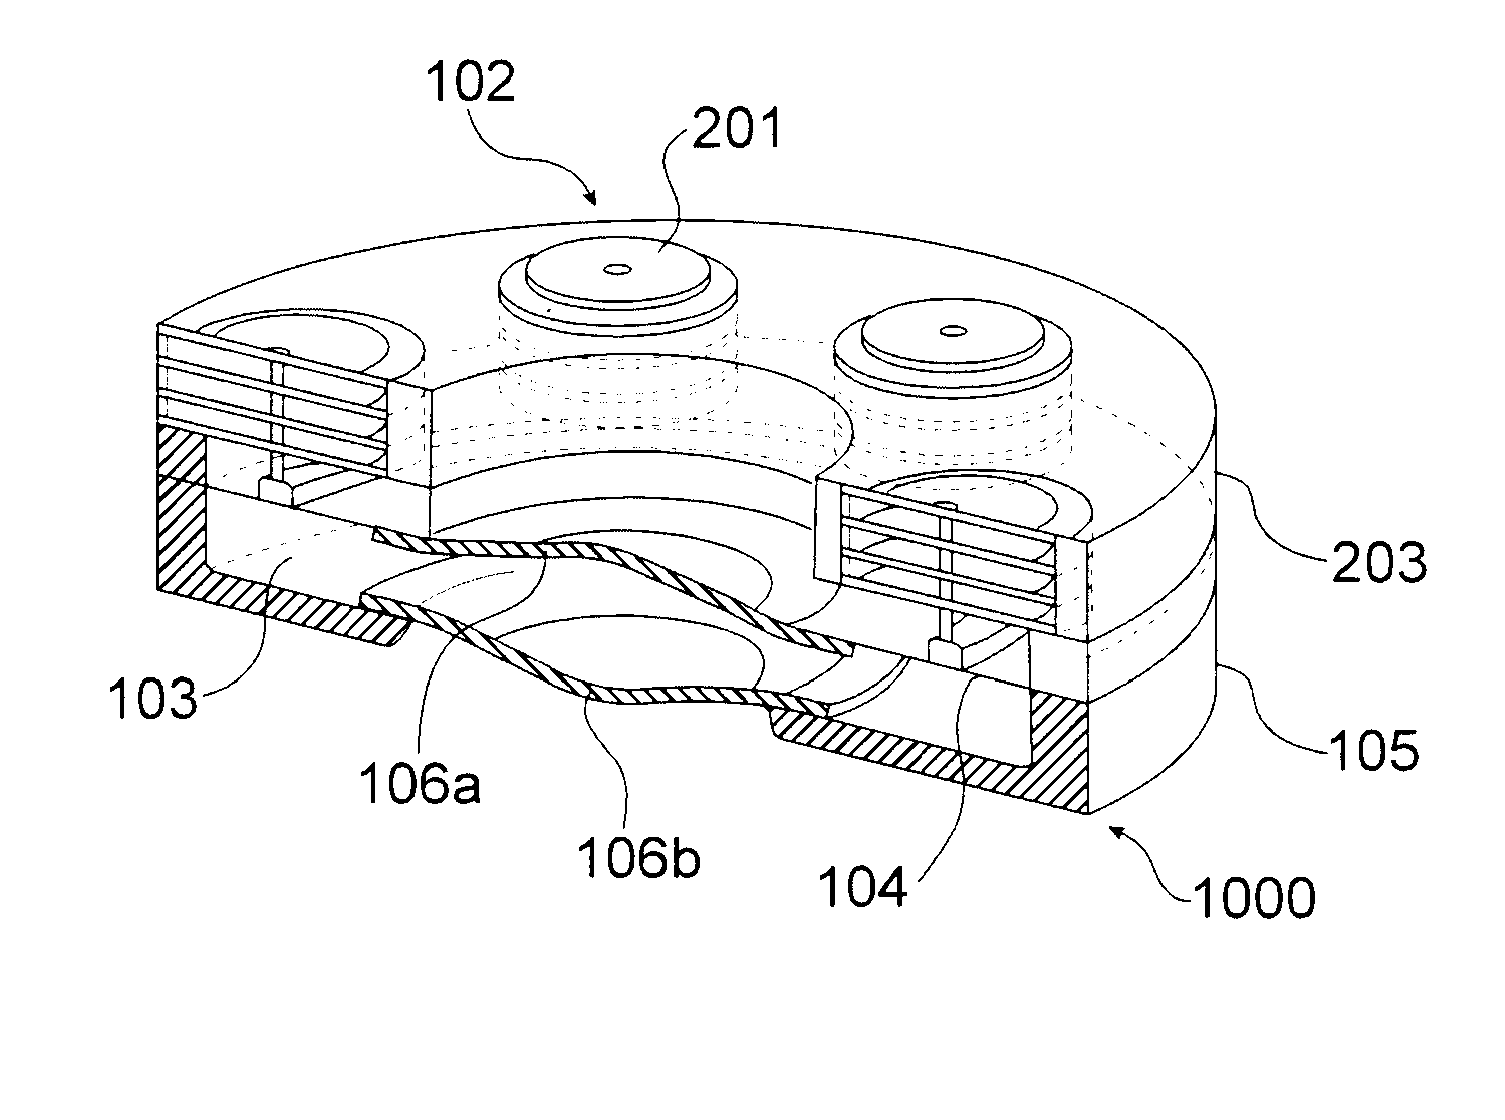 Optical device with means of actuating a compact deformable membrane